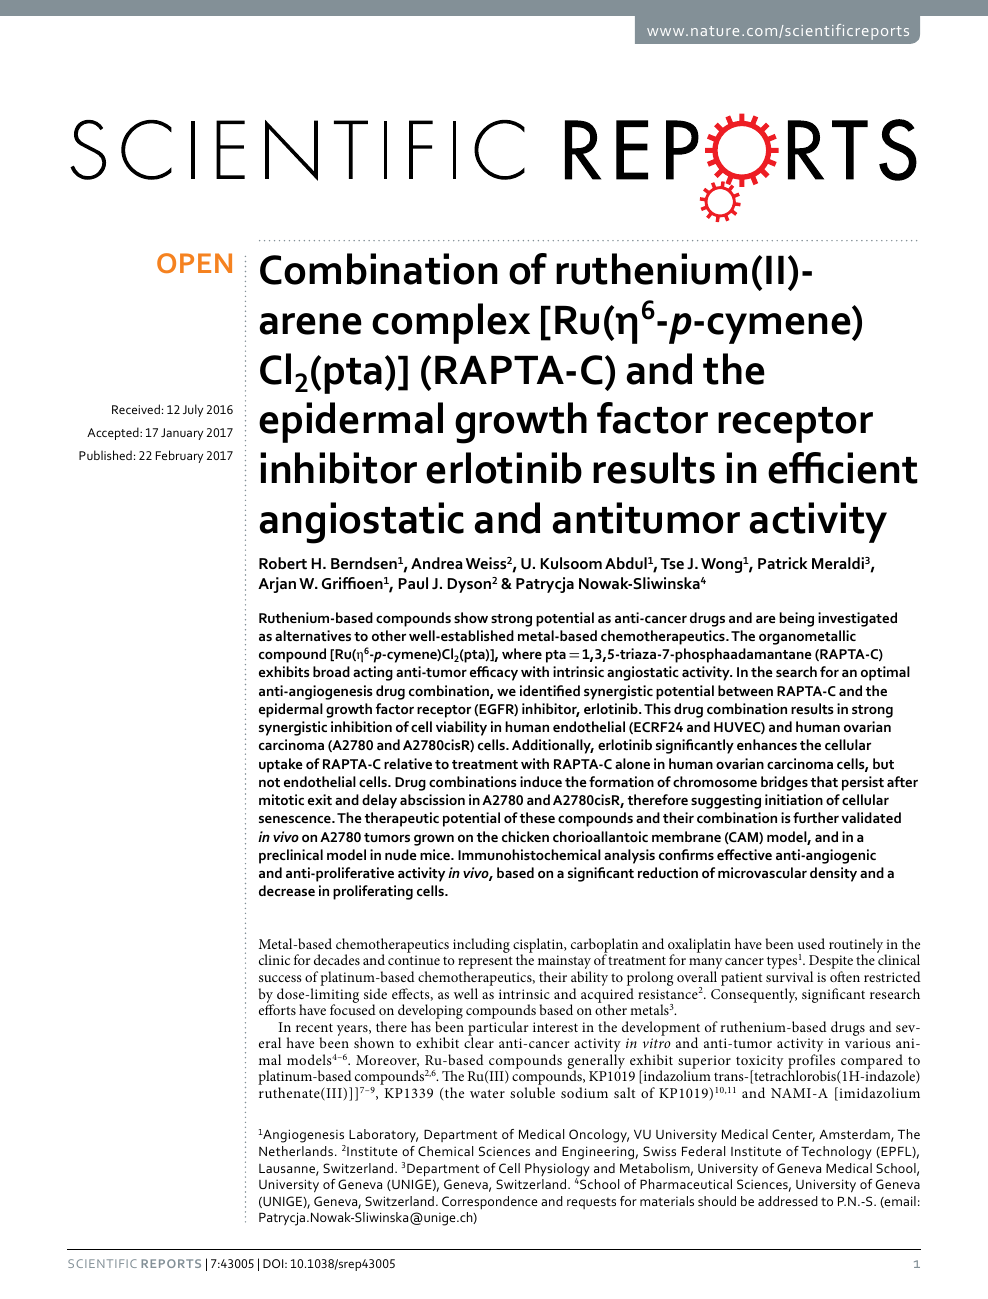 Combination Of Ruthenium Ii Arene Complex Ru H6 P Cymene Cl2 Pta Rapta C And The Epidermal Growth Factor Receptor Inhibitor Erlotinib Results In Efficient Angiostatic And Antitumor Activity Topic Of Research Paper In Clinical Medicine Download